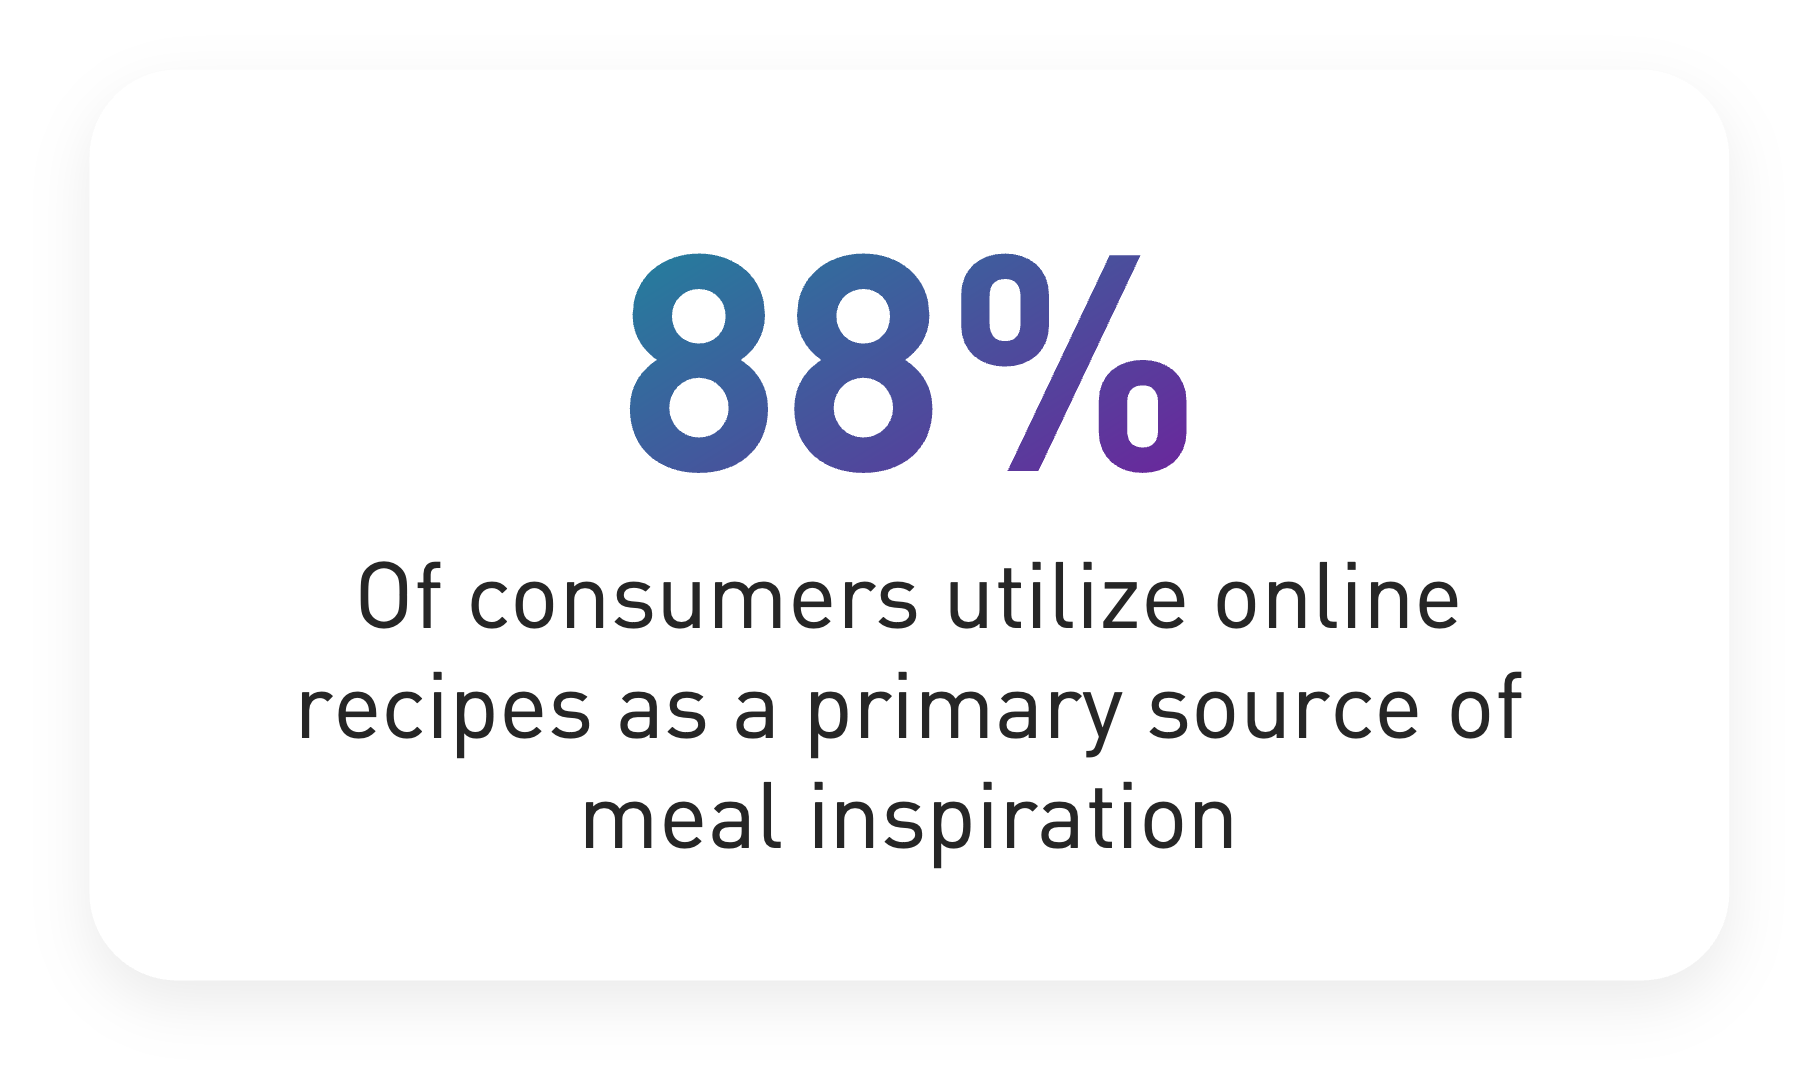 88%  Of consumers utilize online recipes as a primary source of meal inspiration